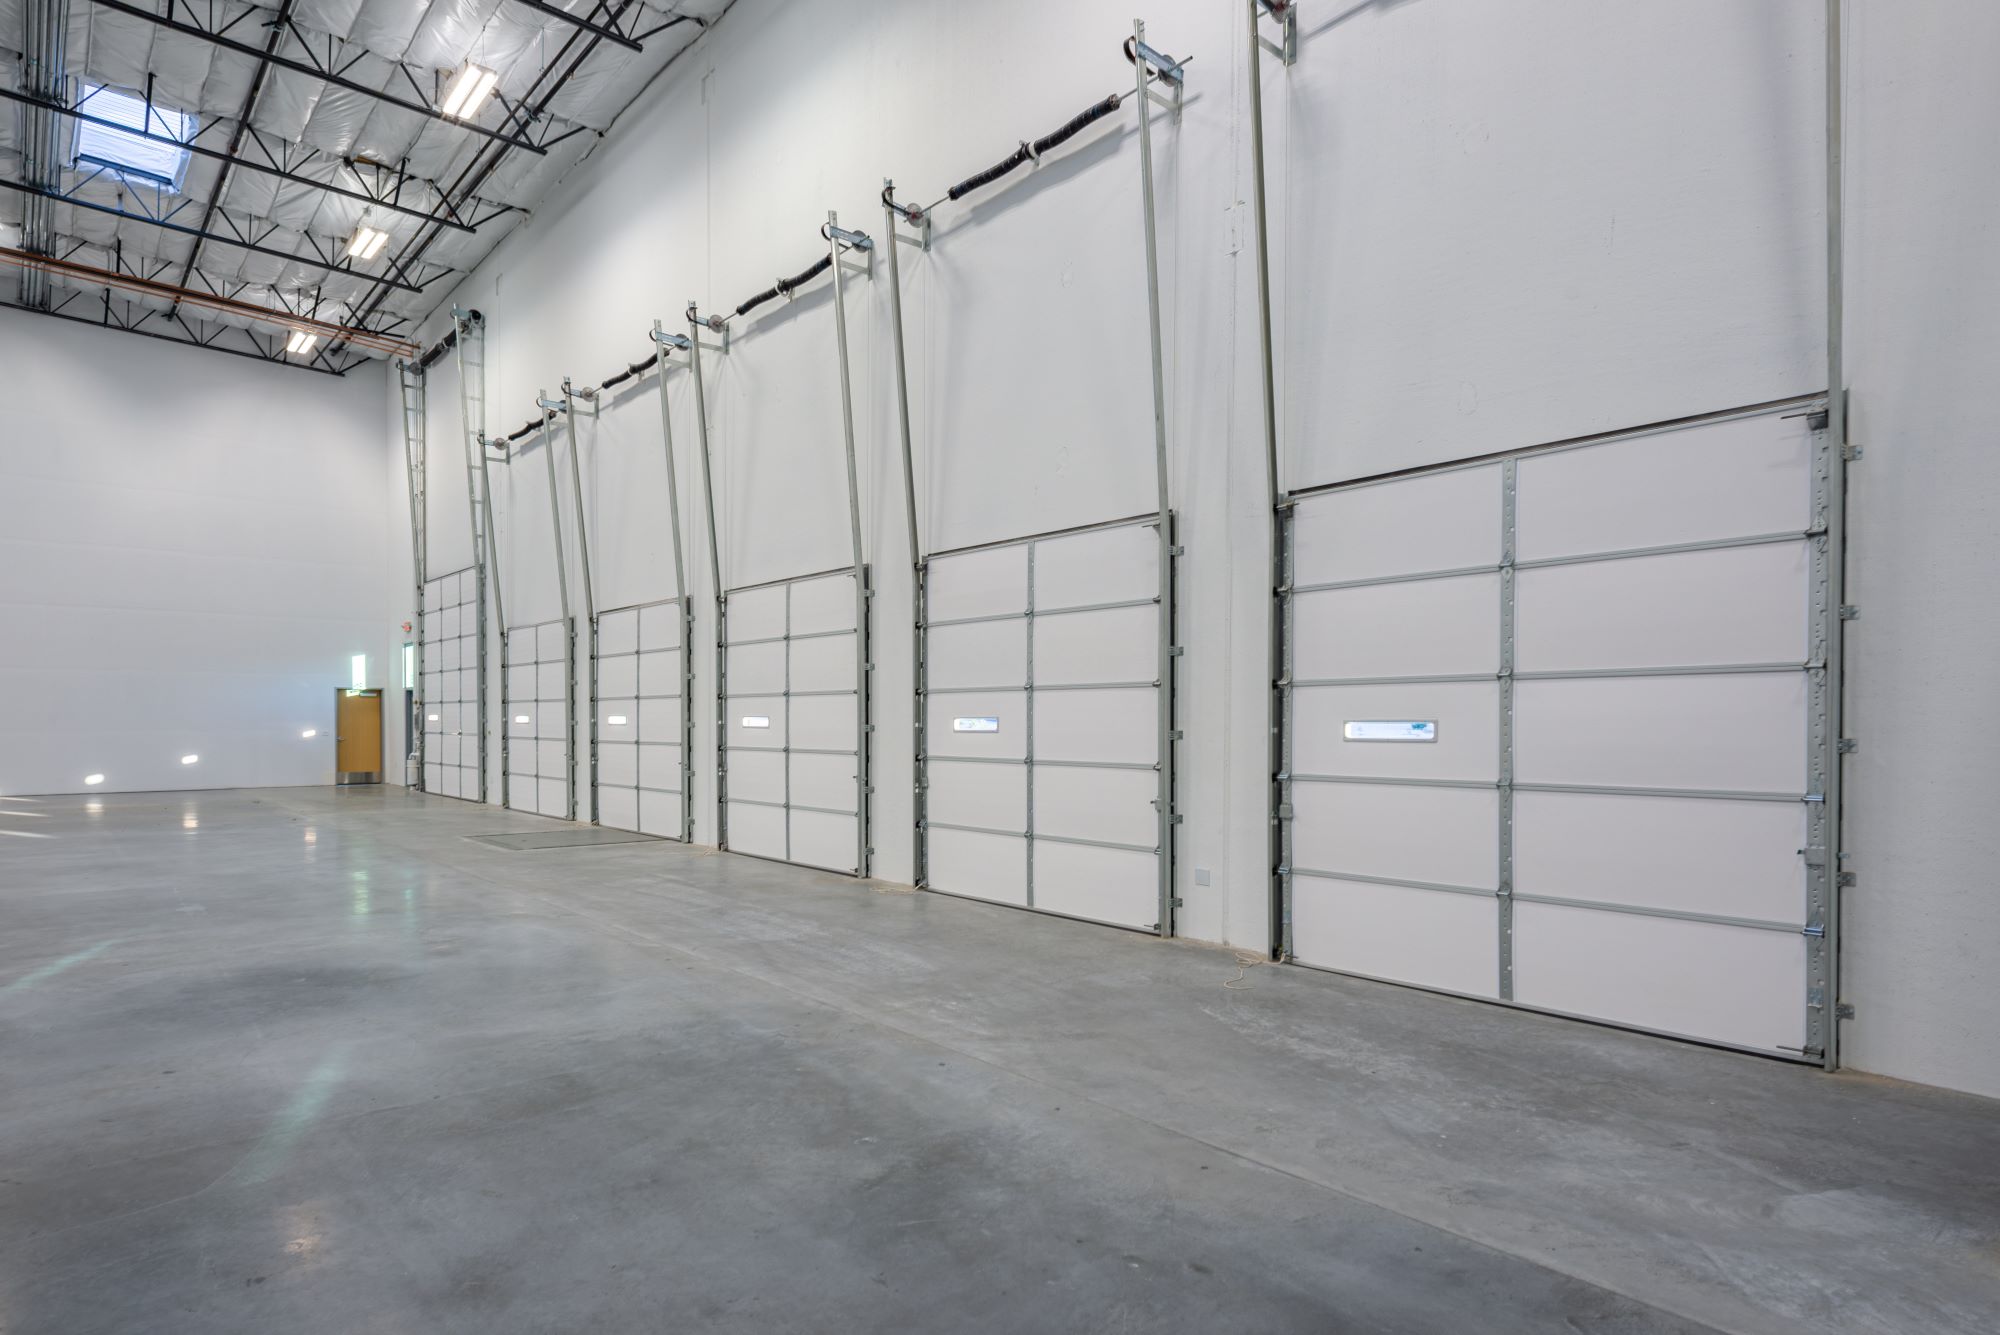 Tropical Speedway Commerce Center dock doors with tall ceiling heights